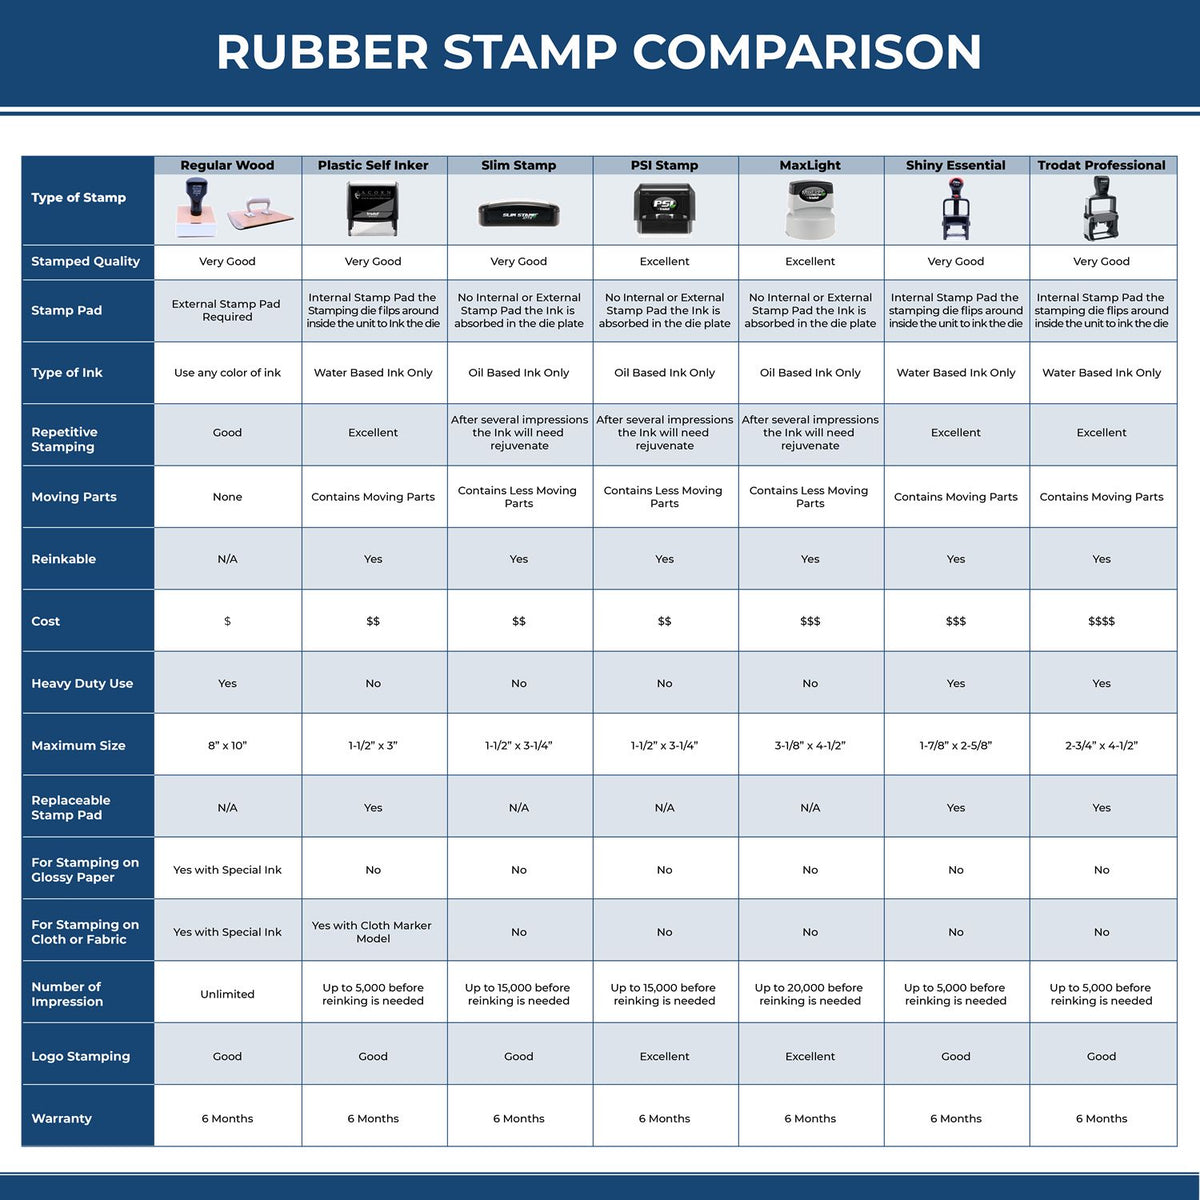 Large Self-Inking Client&#39;s Copy Stamp 4861S Rubber Stamp Comparison